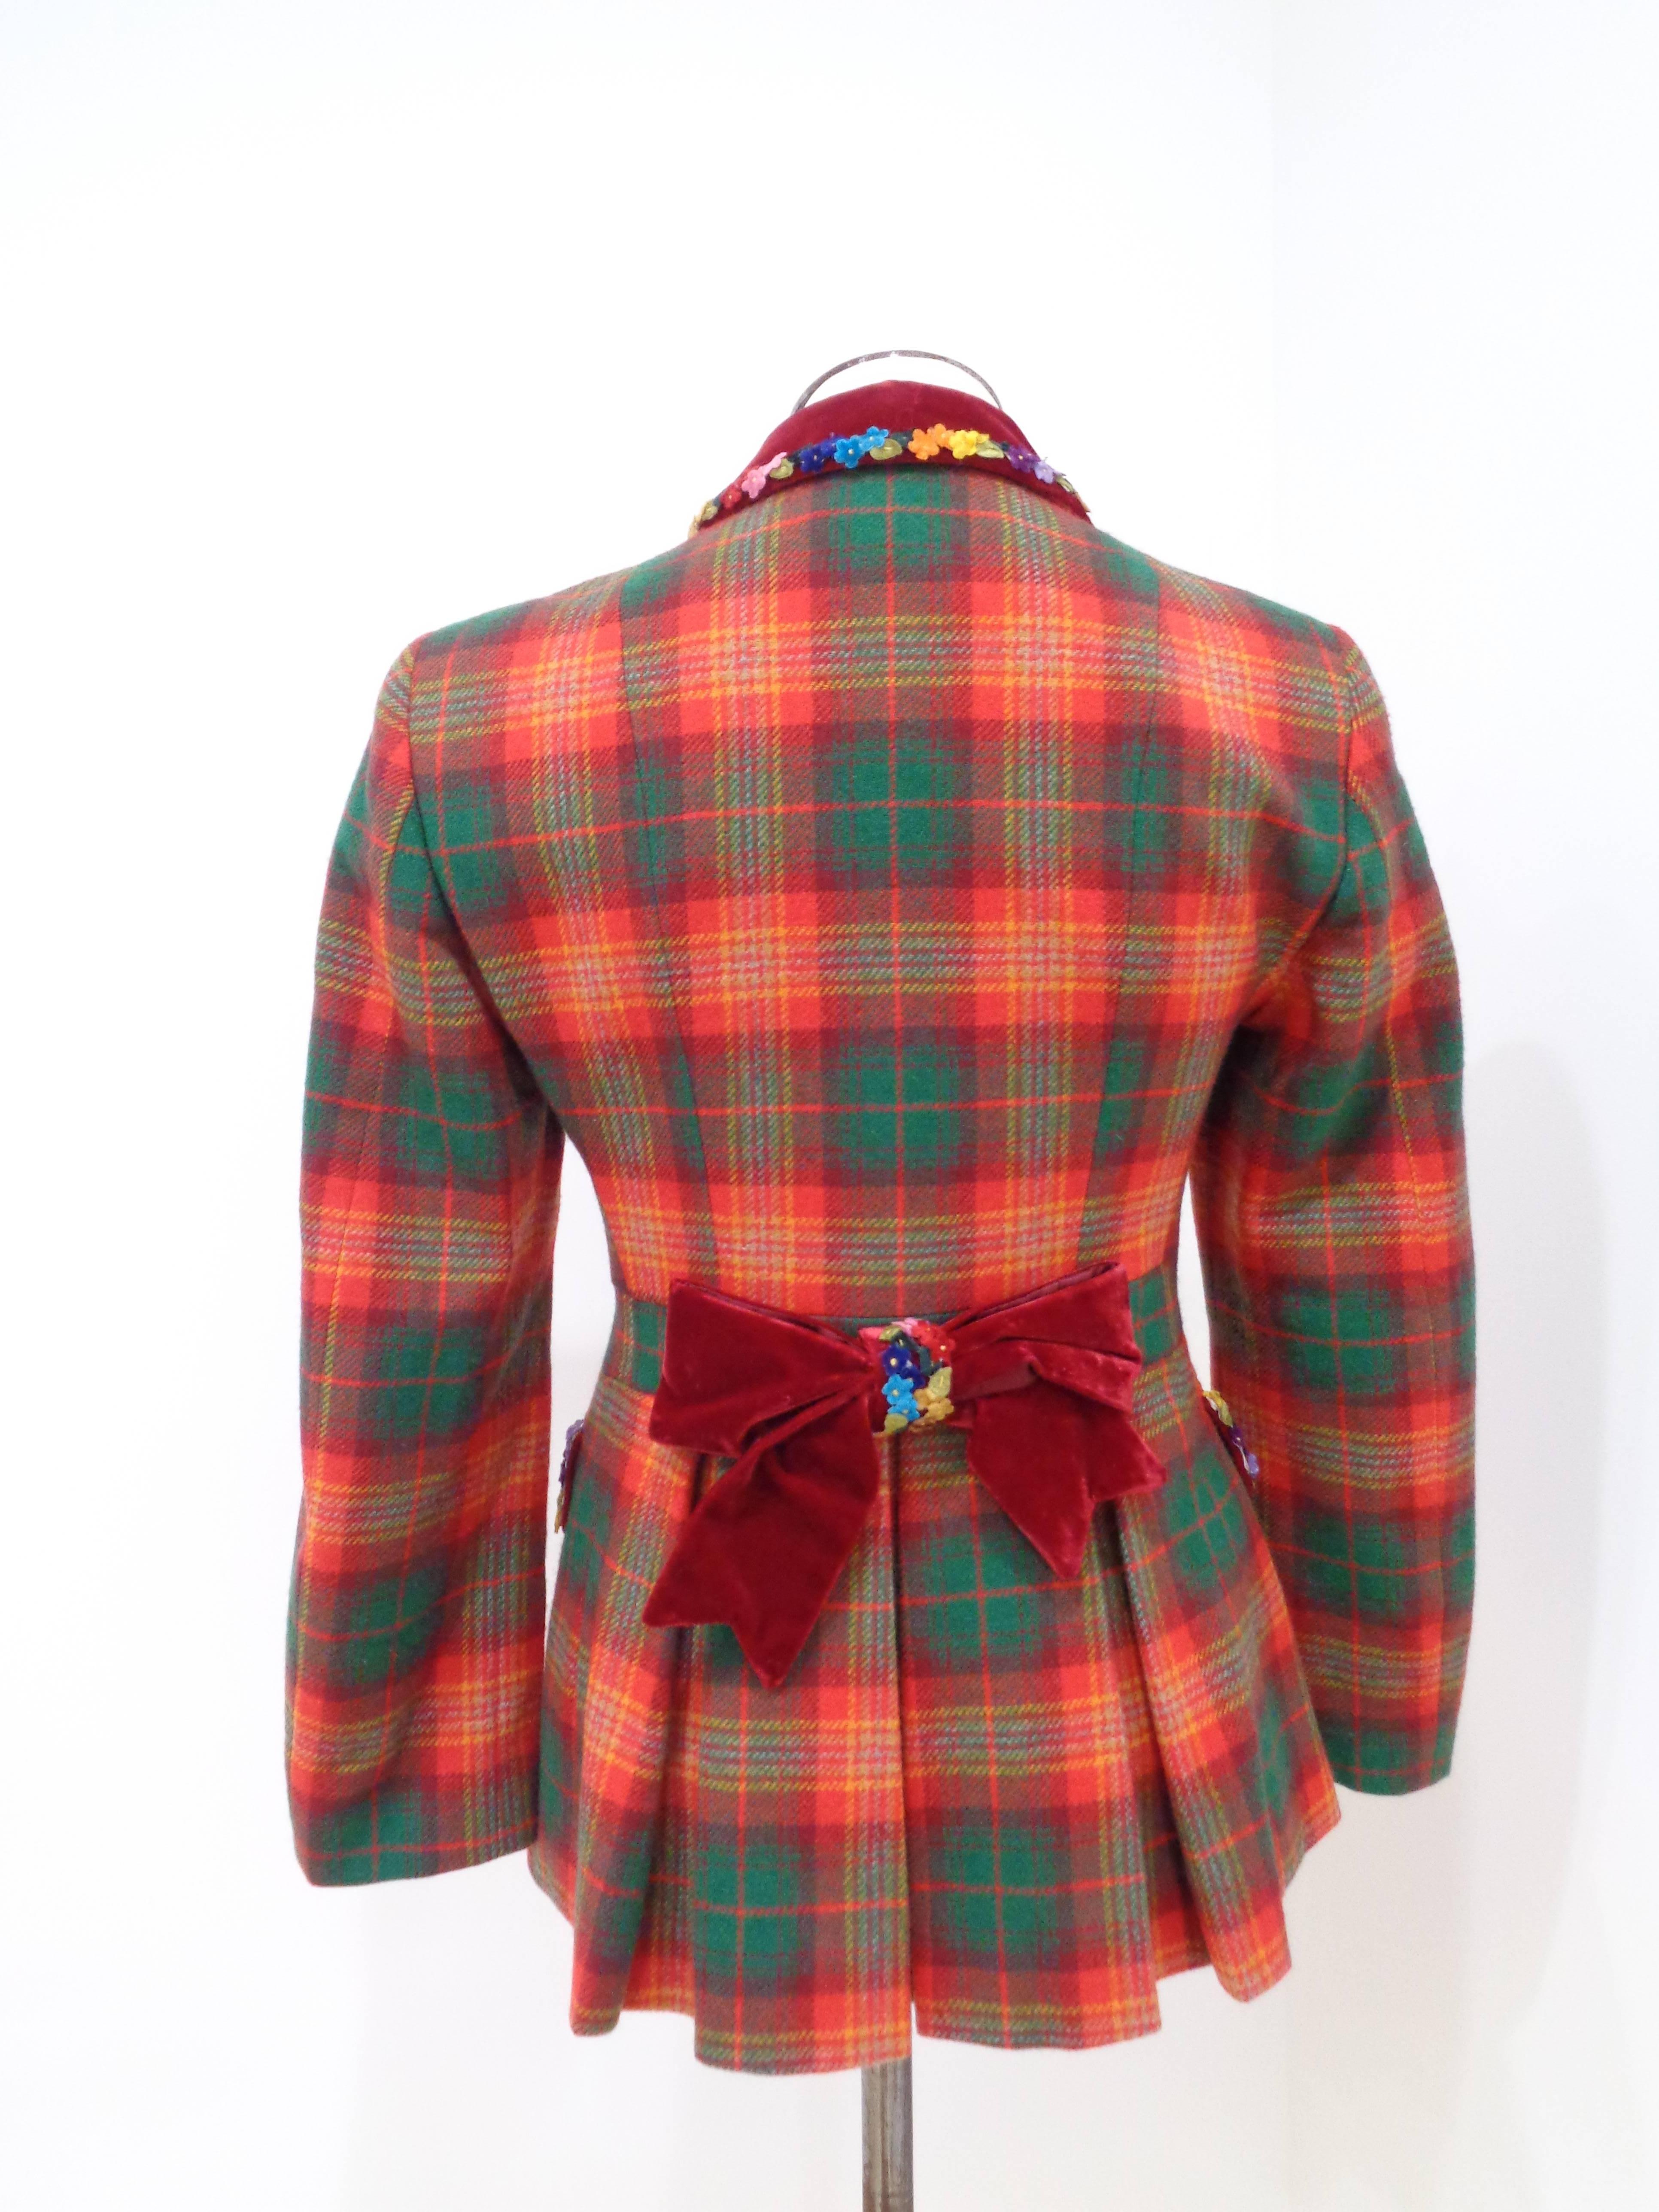 Moschino Cheap & Chic tartan Jacket In Excellent Condition In Capri, IT